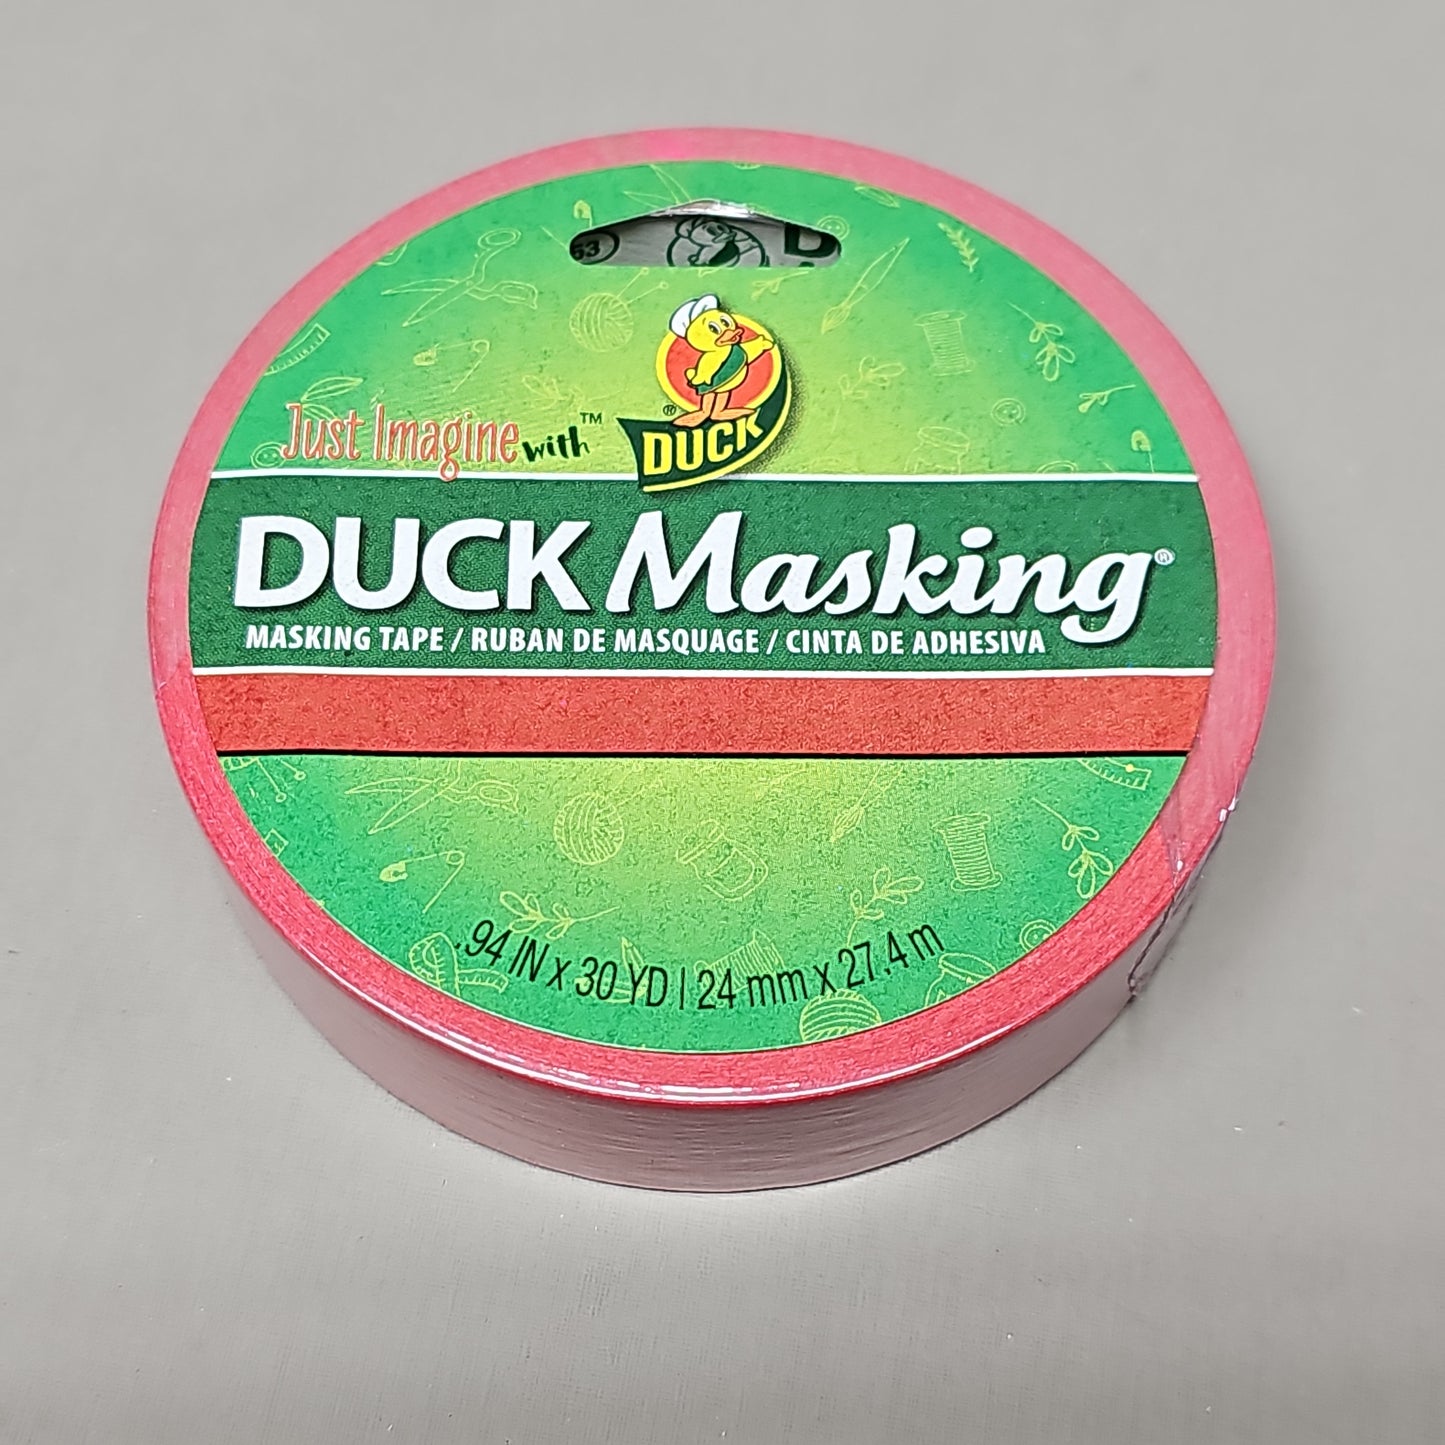 SHURTAPE DUCK Pack of 6 Duck Masking Tape .94" x 30 YD Red (New)